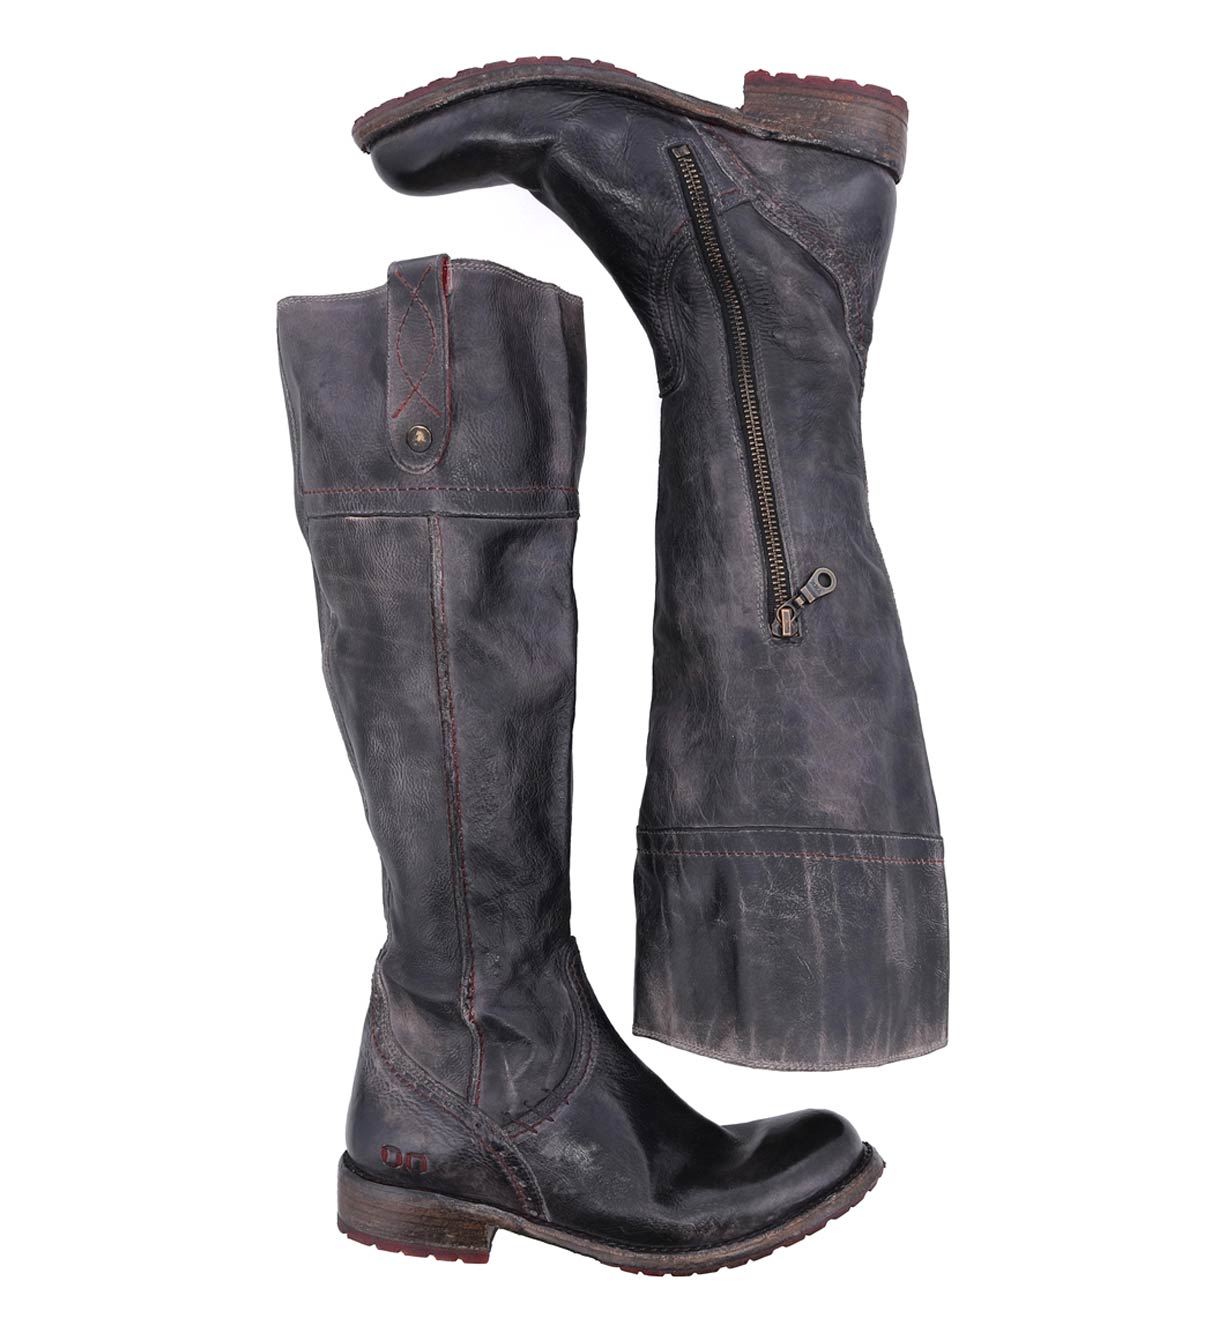 A pair of Jacqueline Wide Calf women's boots by Bed Stu with zippers on the side.